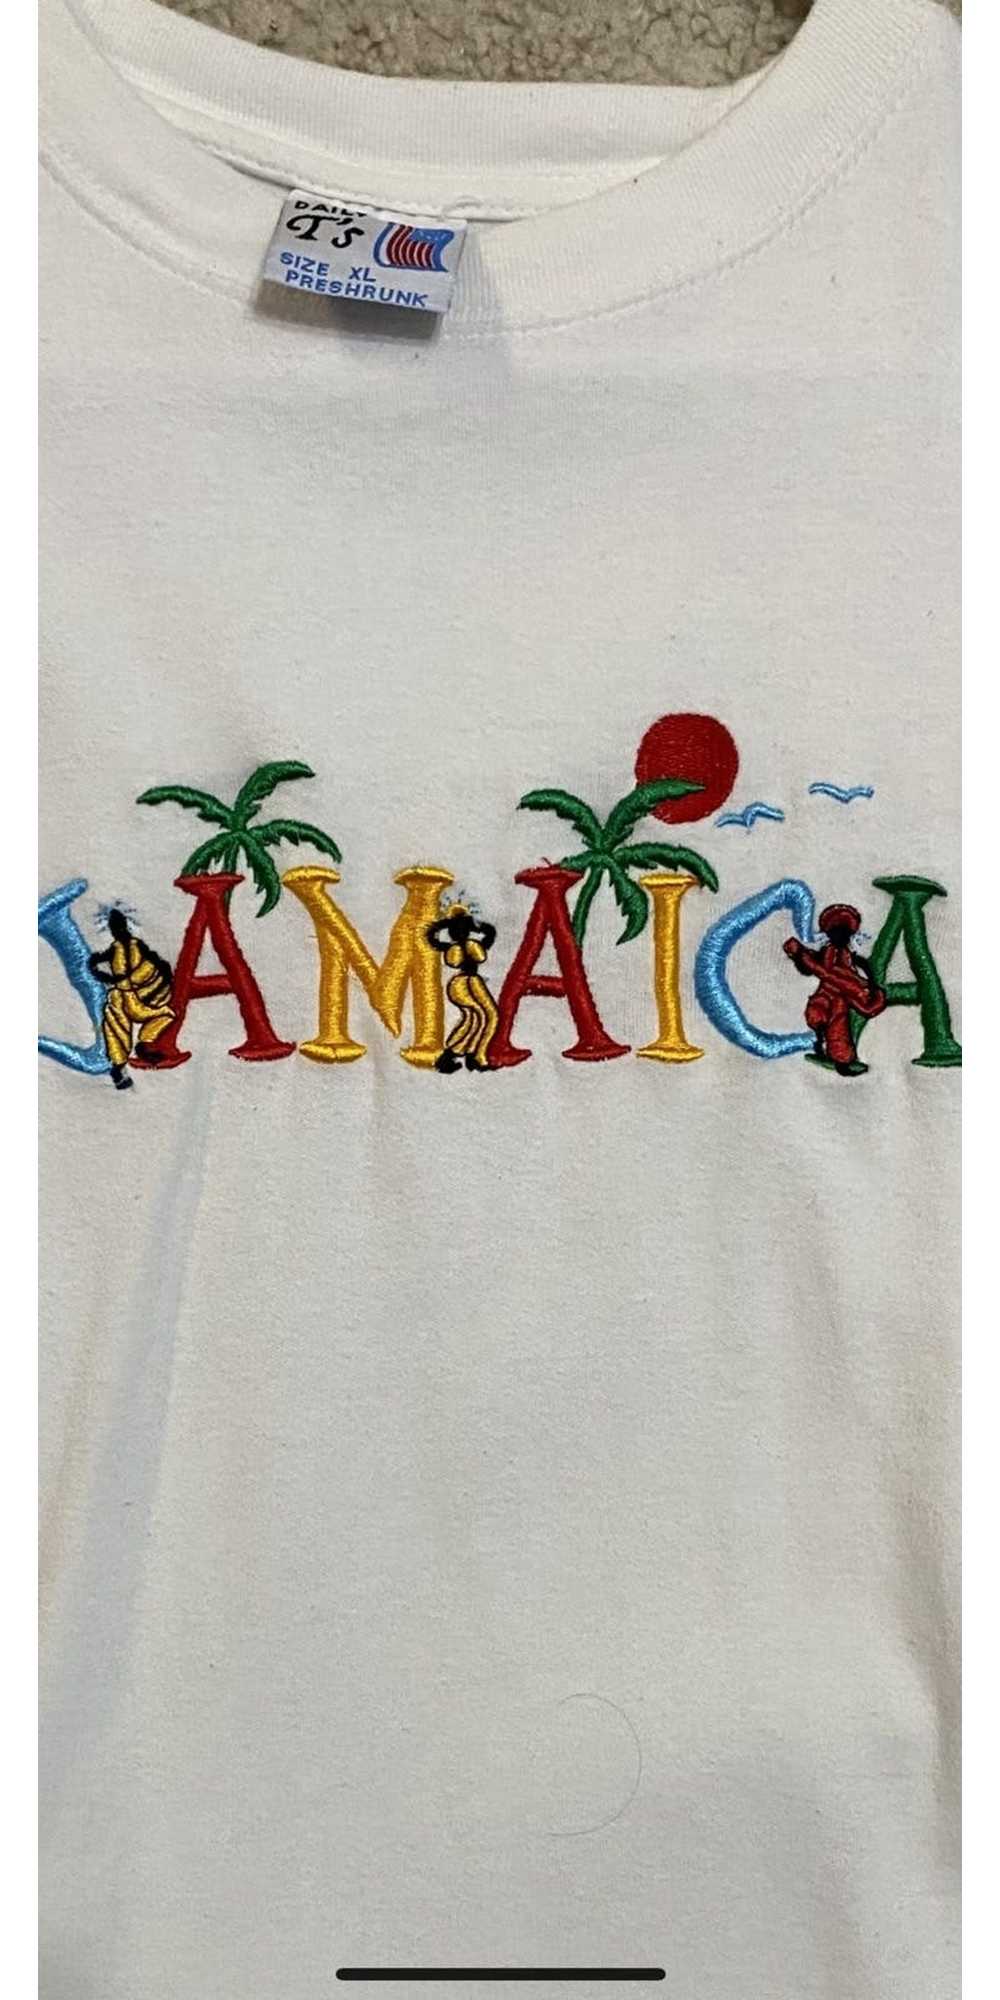 Vintage Jamaica Embroidered Chest Logo - image 2